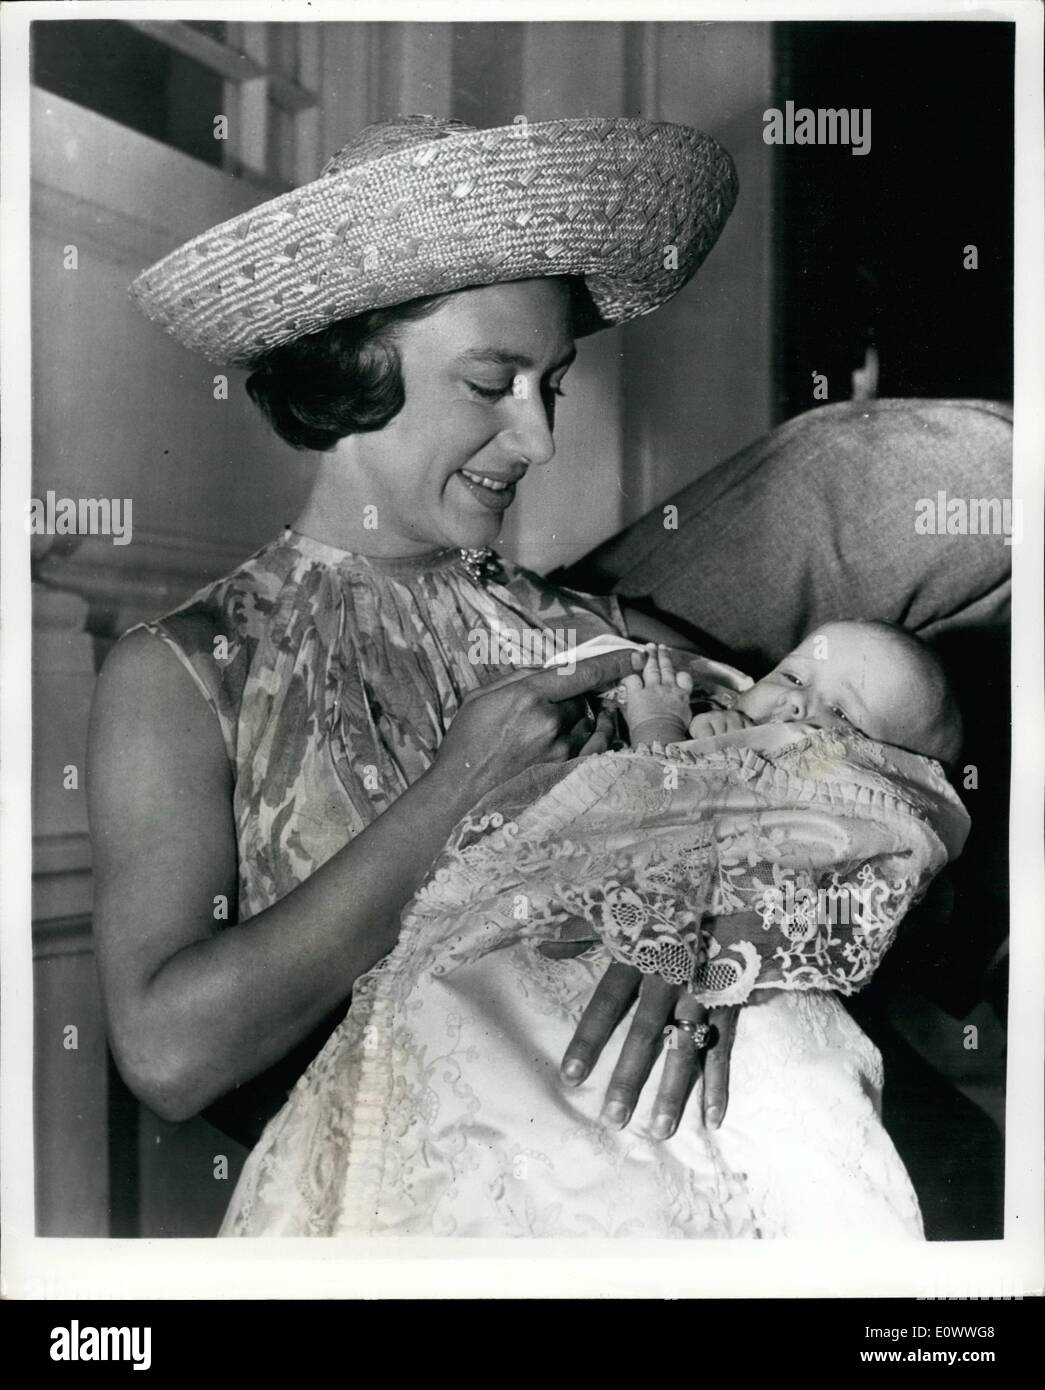 Jul. 07, 1964 - Princess Margaret's Daughter Lady Sarah is Christened at Buckingham Palace. Lady Sarah Armstrong Jones, the 2 month old daughter of Princess Margaret and the Earl of Snowdon, was christened in the private chapel of Buckingham Palace today. This ceremony was conducted by the Very Reverend Eric Abbott, the Dean of Westminster. Photo Shows: Princess Margaret pictured with her baby daughter Lady Sarah Armstrong Jones as they left their Kensington Palace home for Buckingham Palace today. Lady Sarah in seventh in line of succession to the throne. Stock Photo